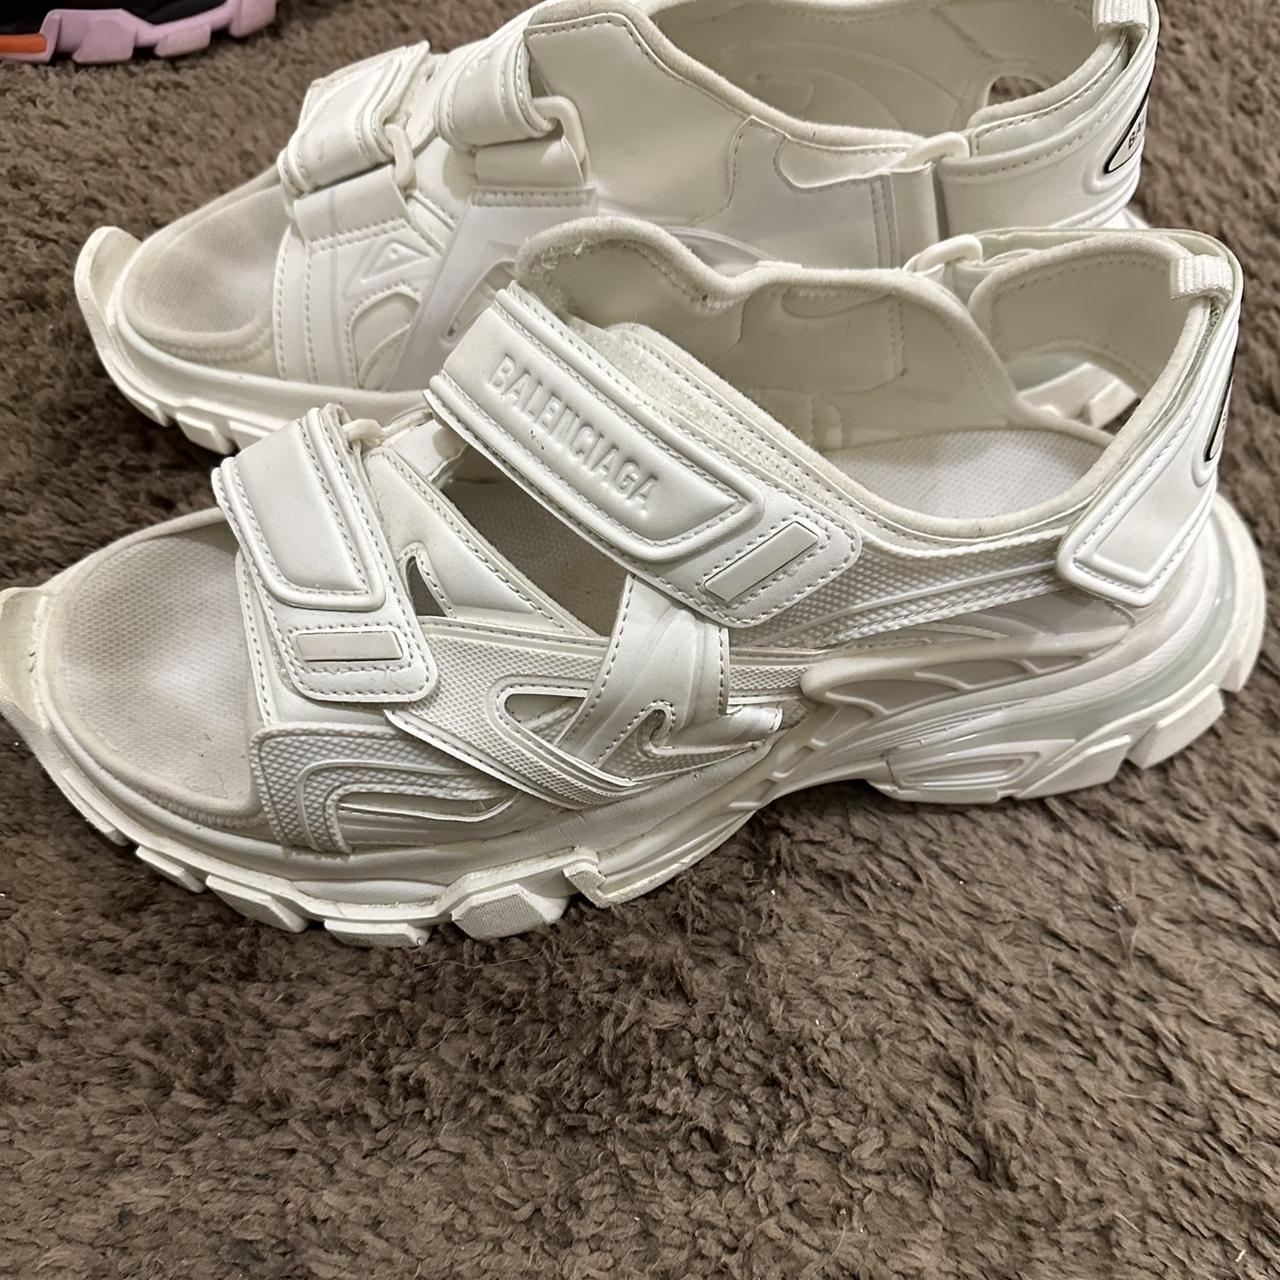 best offer they can be cleaned #balenciaga #trending... - Depop